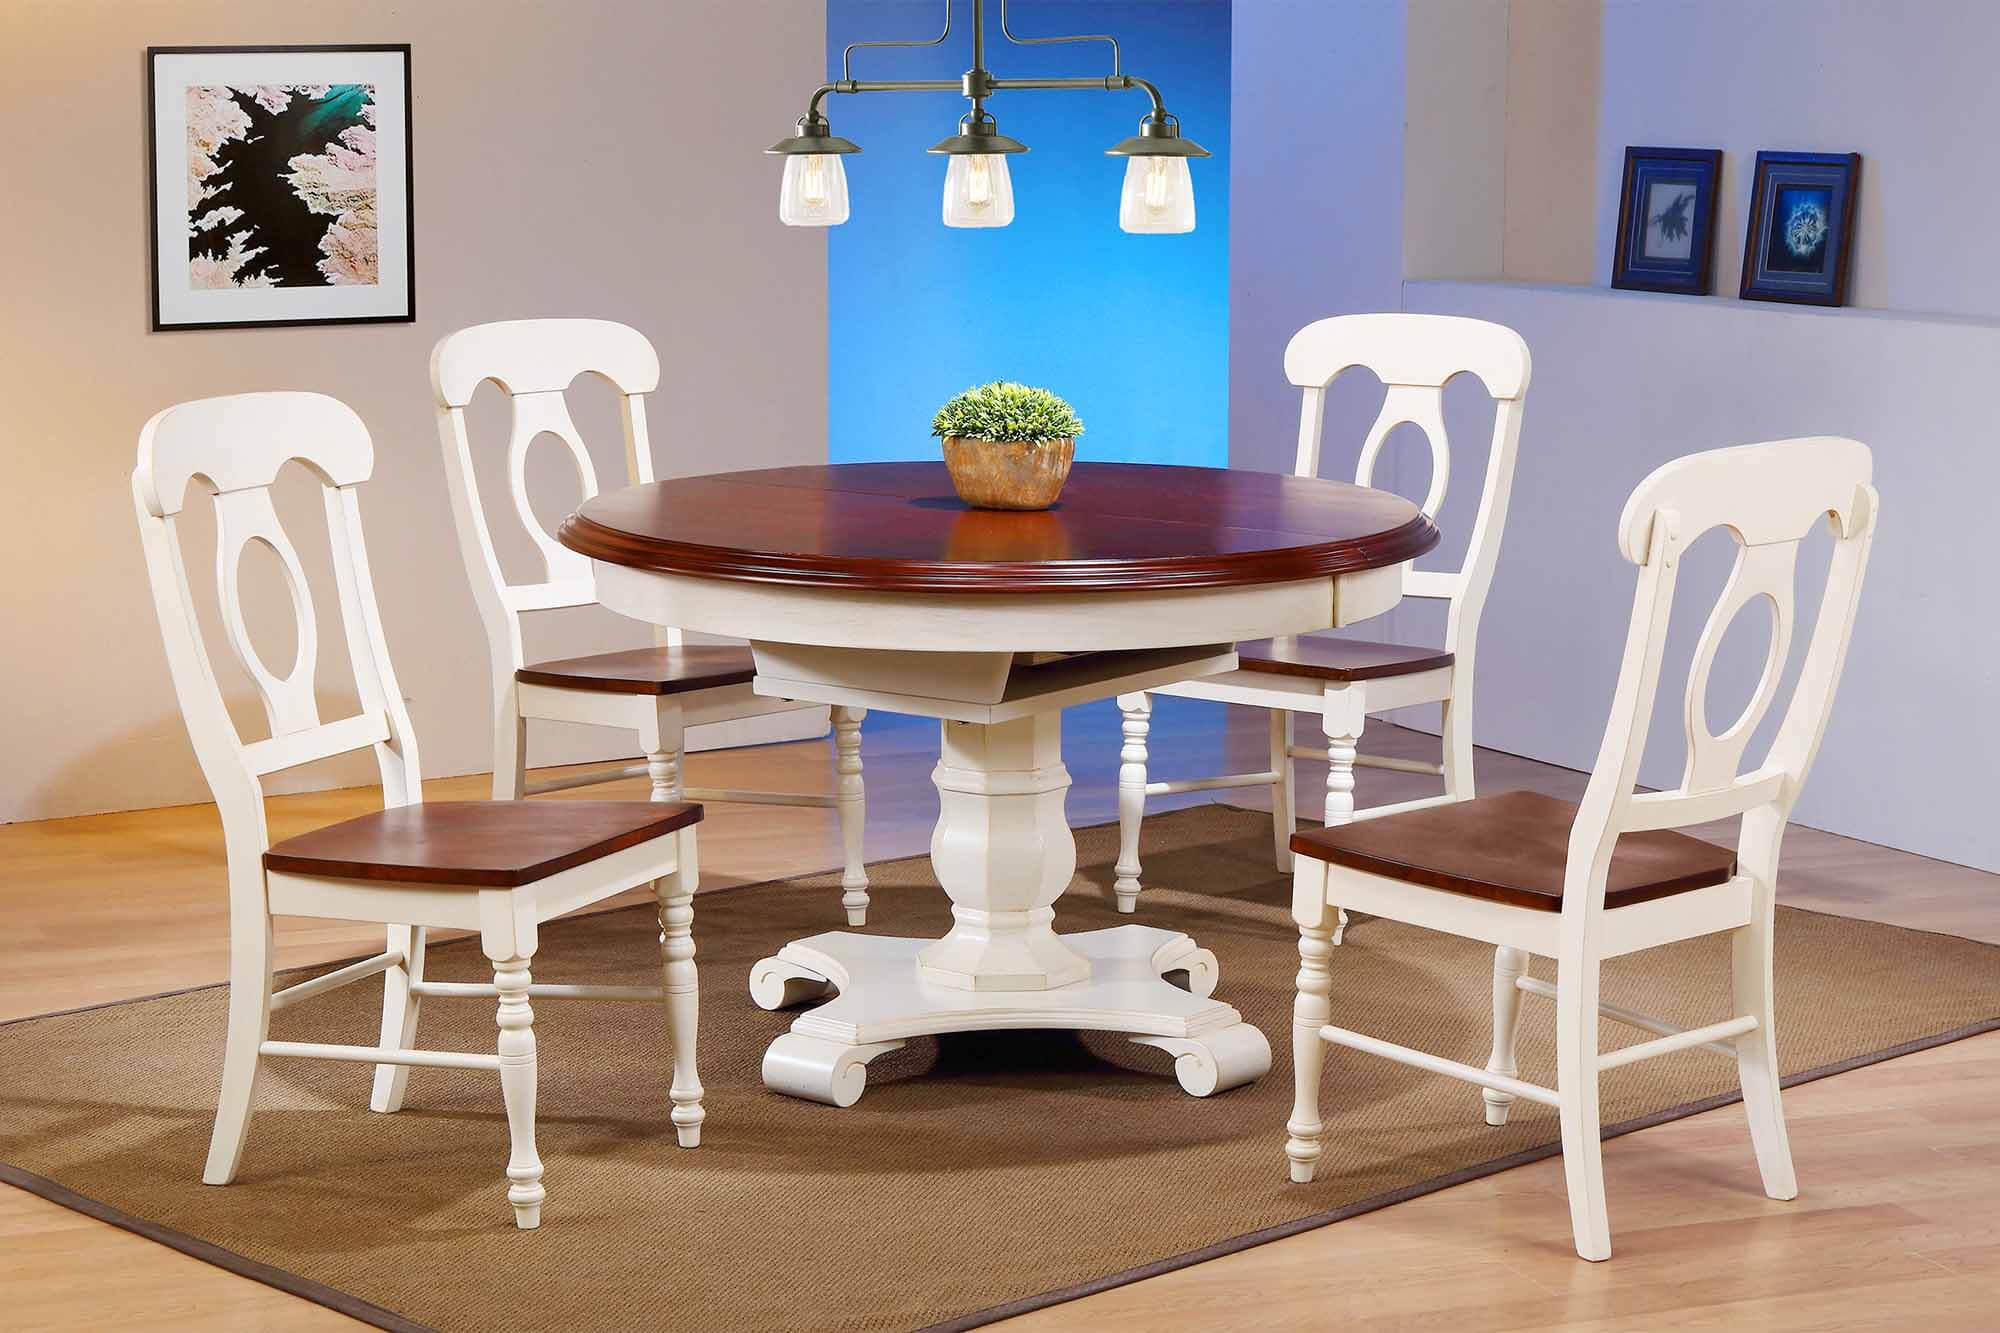 Butterfly Leaf Dining Table Antique White Chestnut Finish Top Sunset Trading